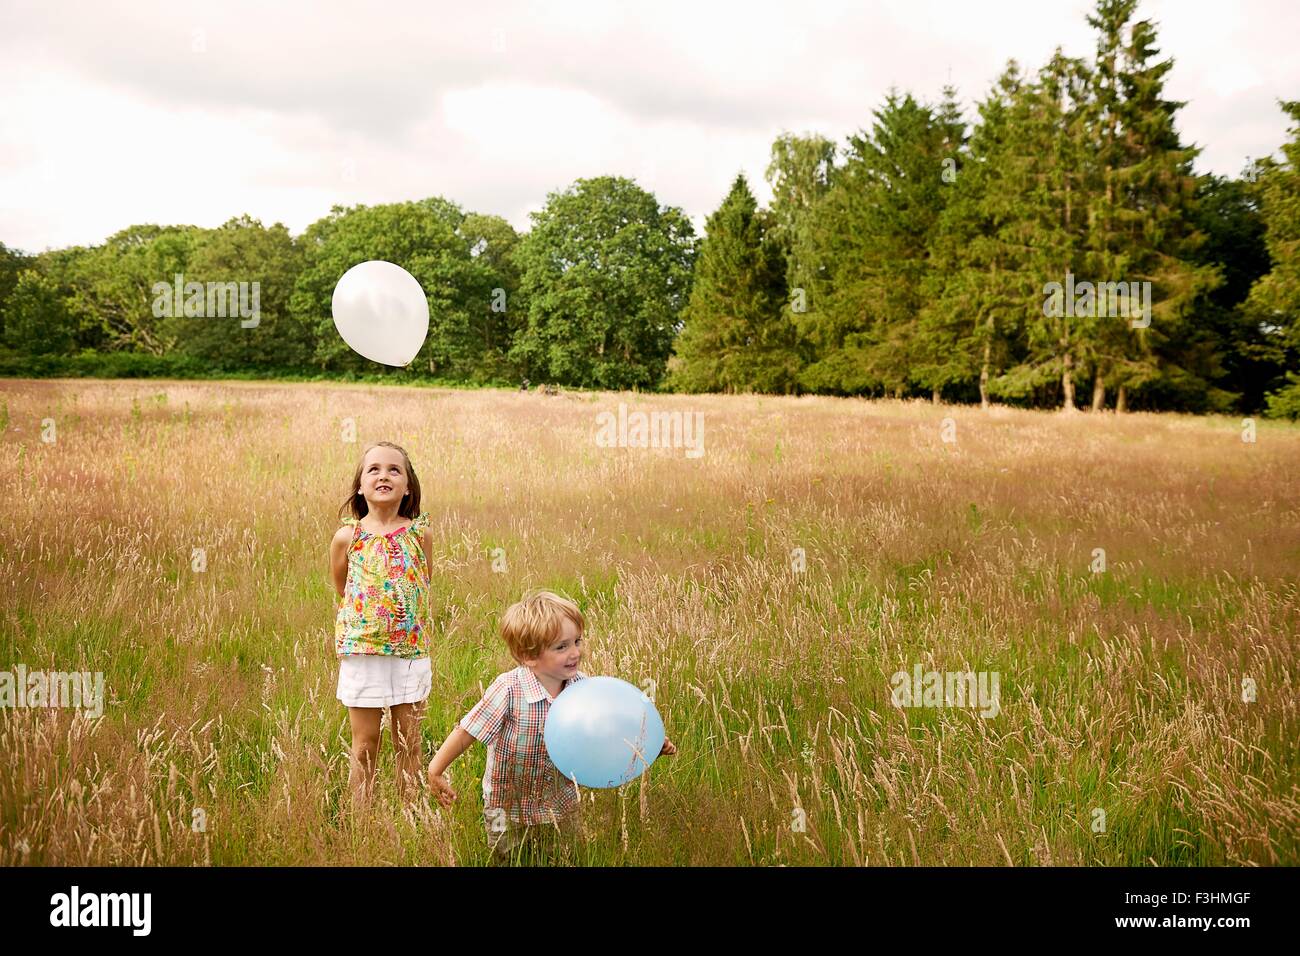 Brother and sister in tall grass playing with balloon Stock Photo